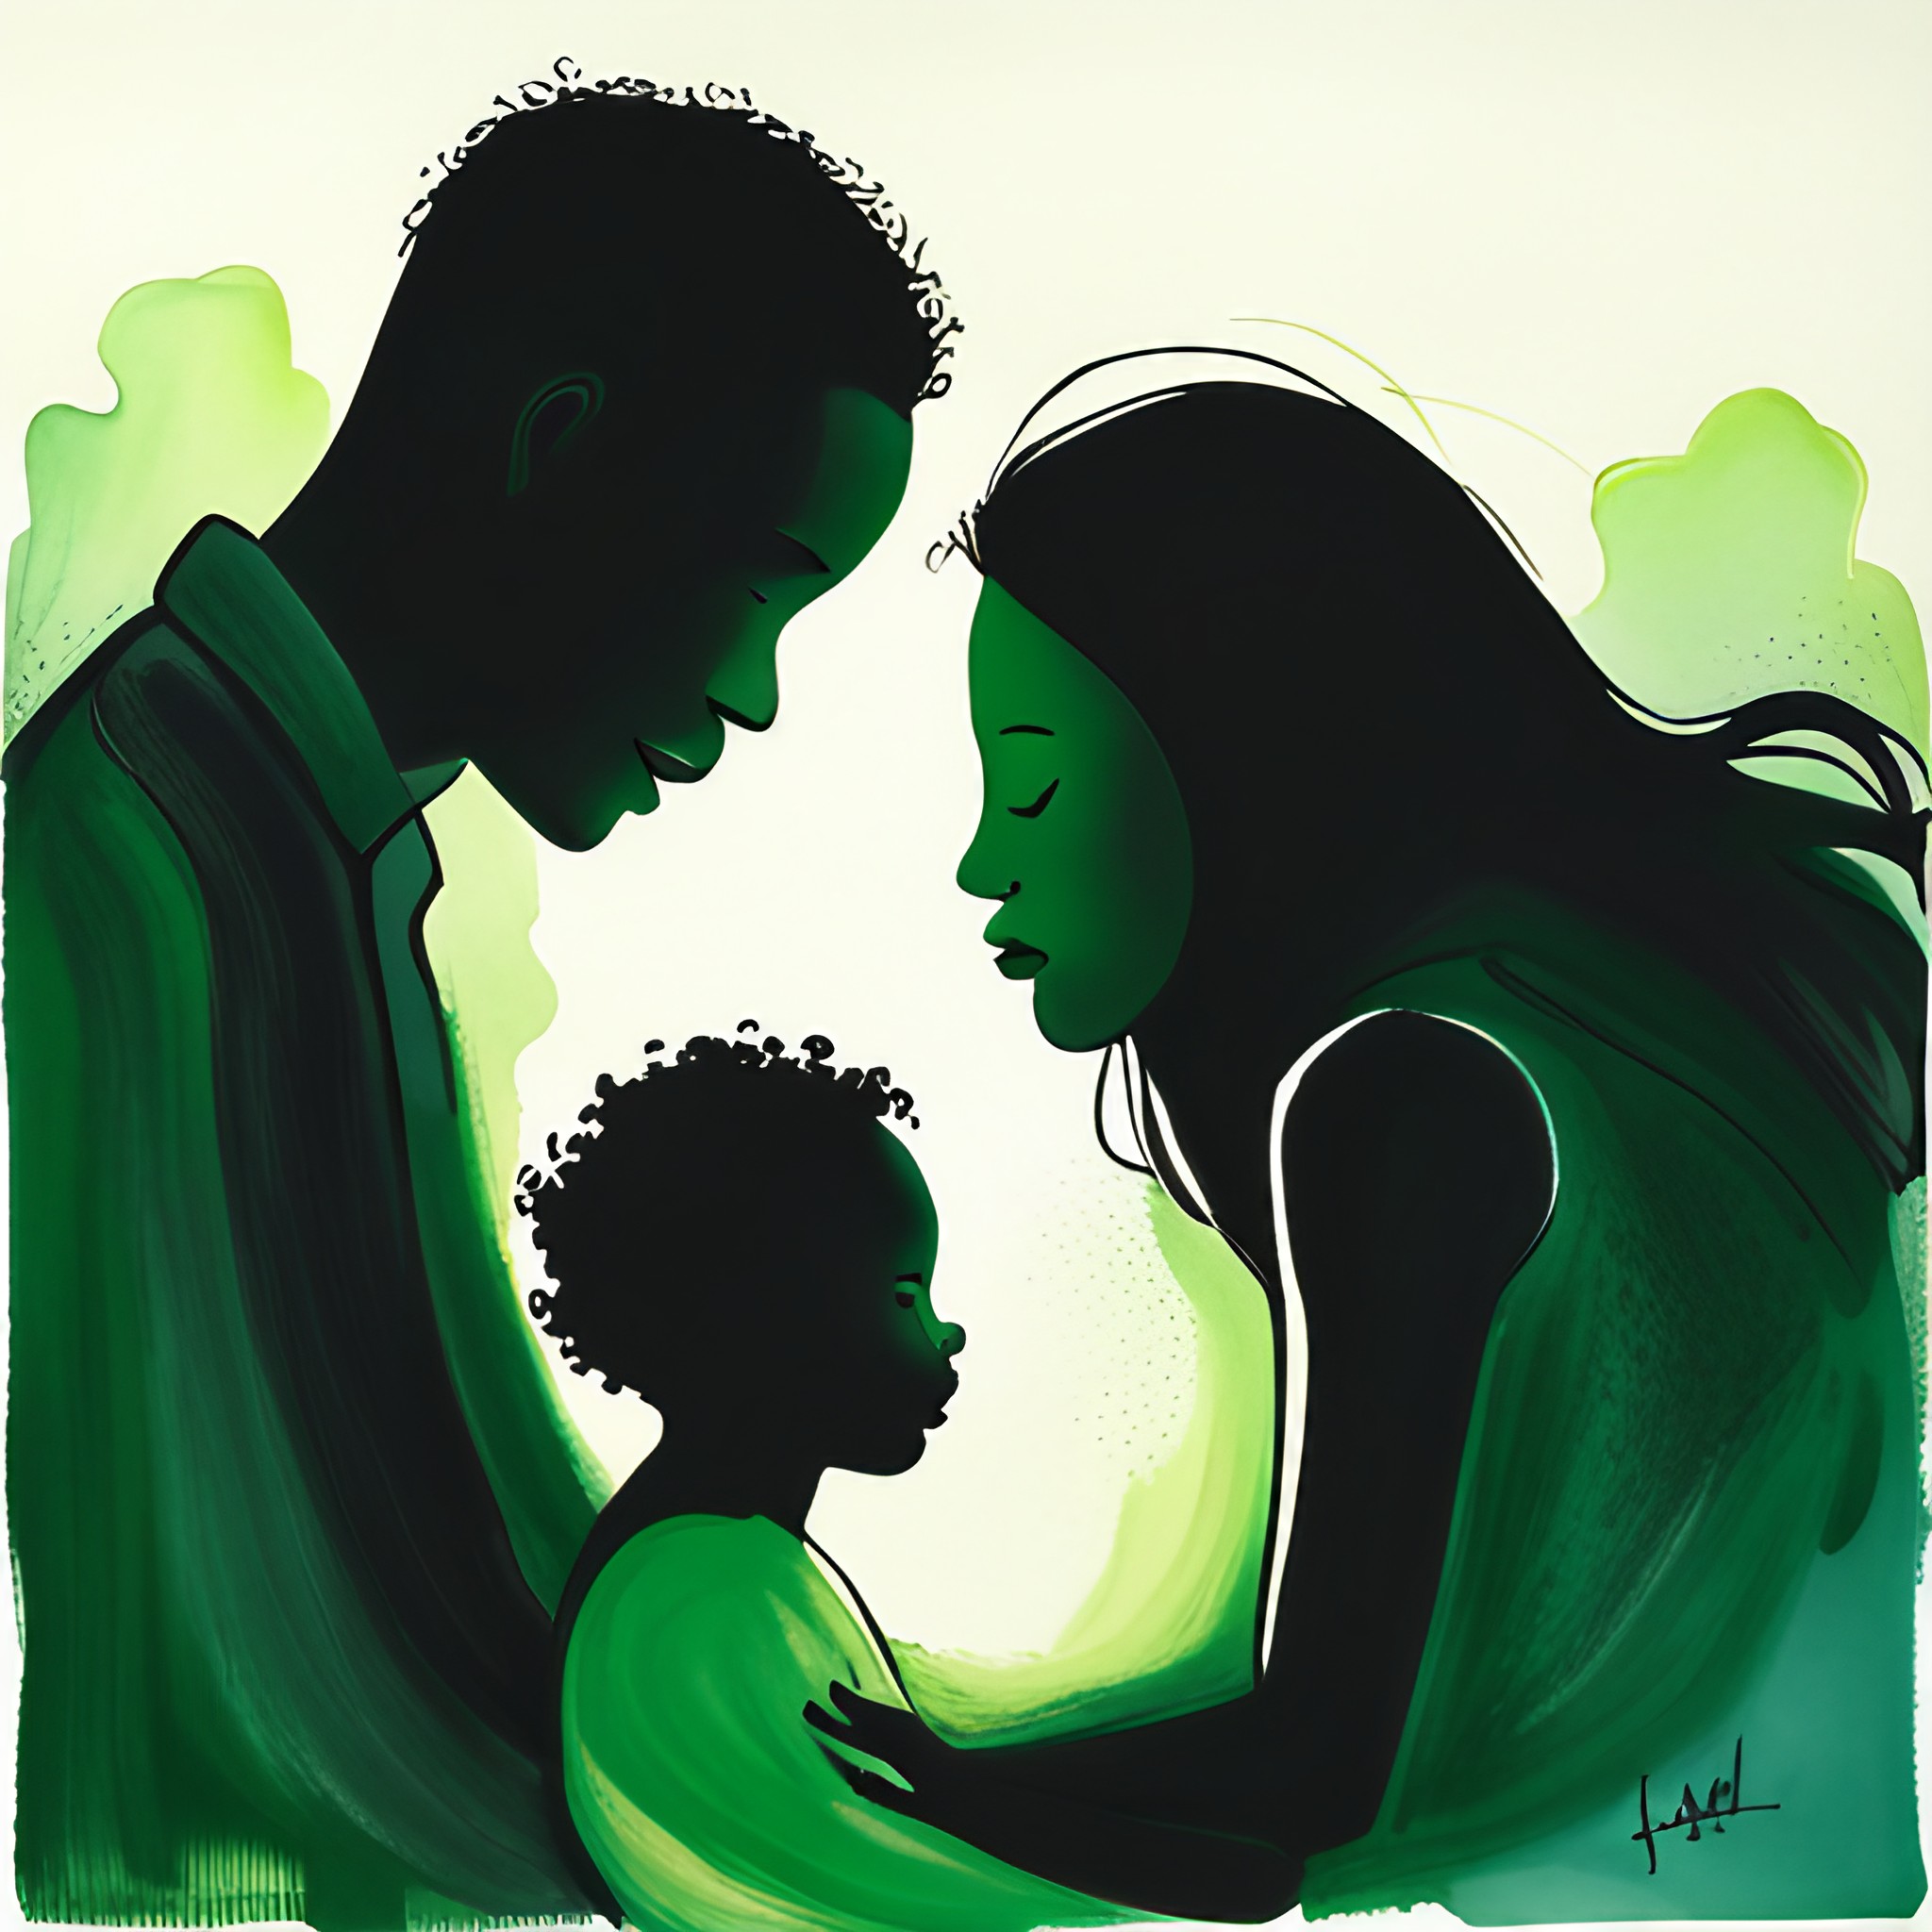 A father and mother face each other with a toddler in the middle. Shades of green.